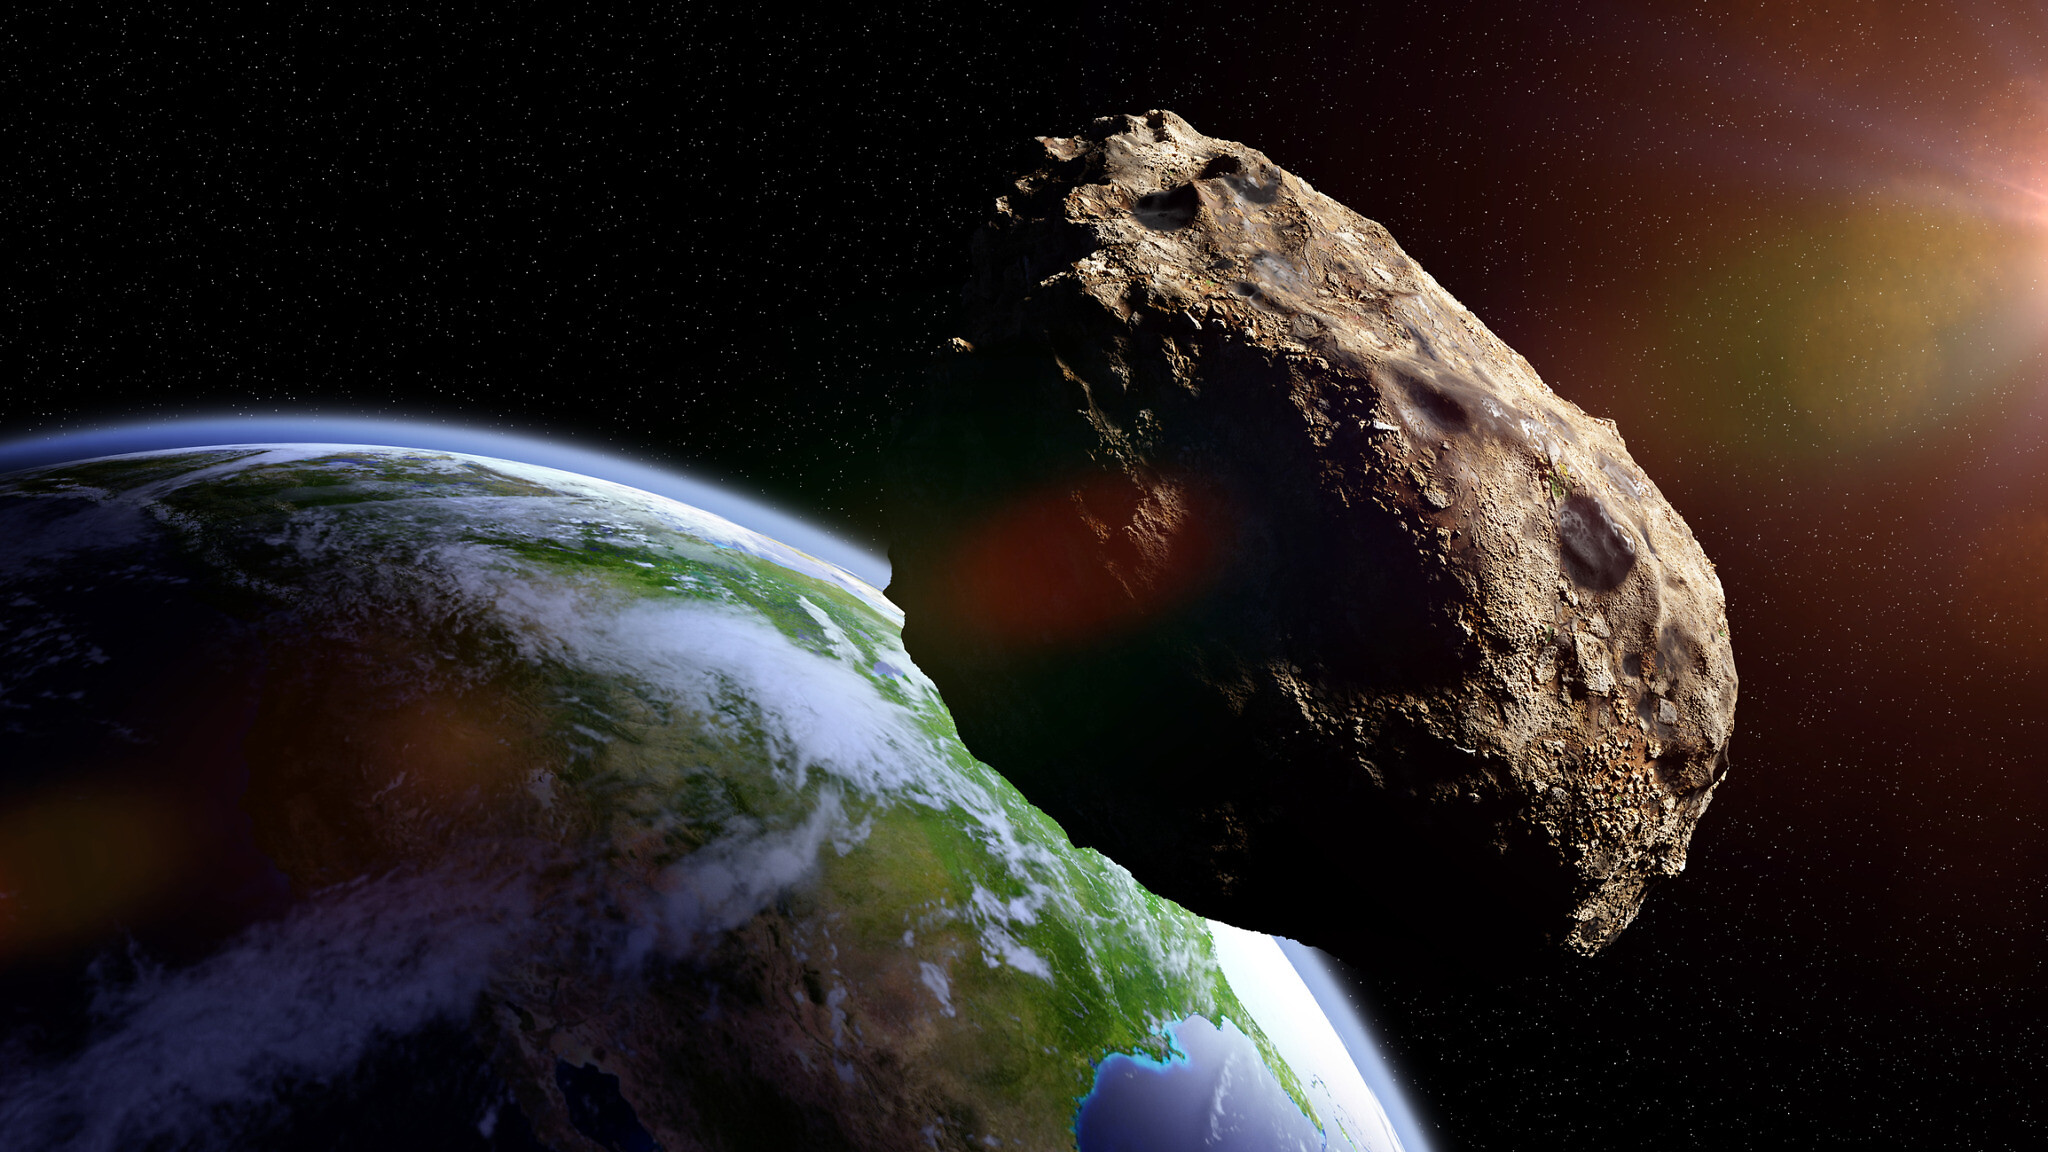 asteroids hitting earth 2036